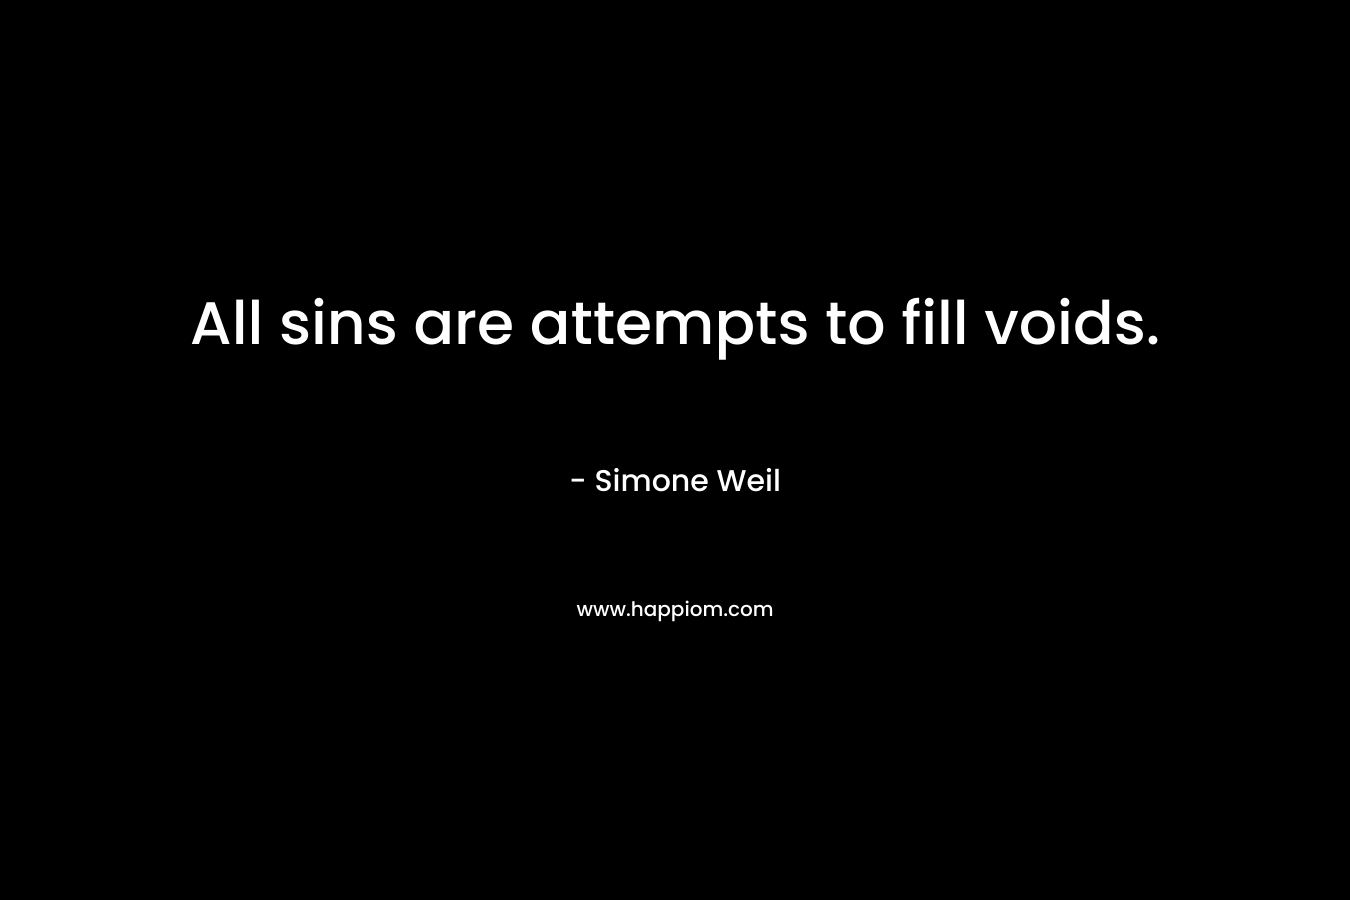 All sins are attempts to fill voids. – Simone Weil